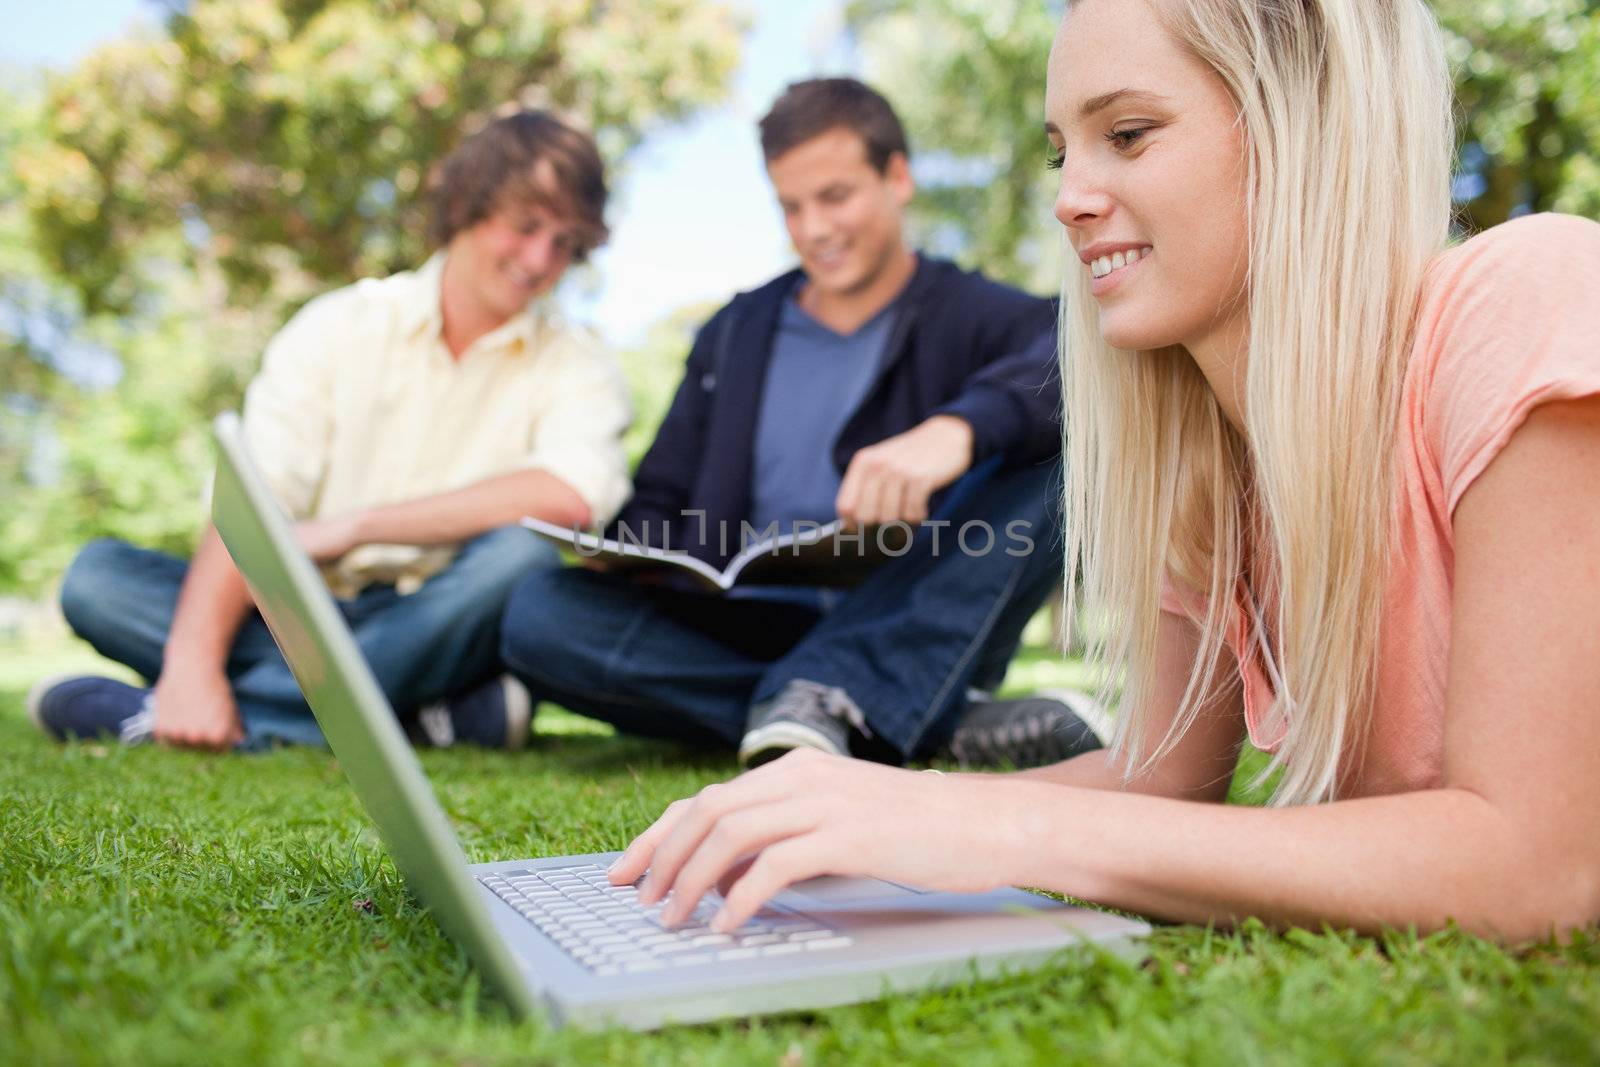 Girl using a laptop while lying in a park with friends in background